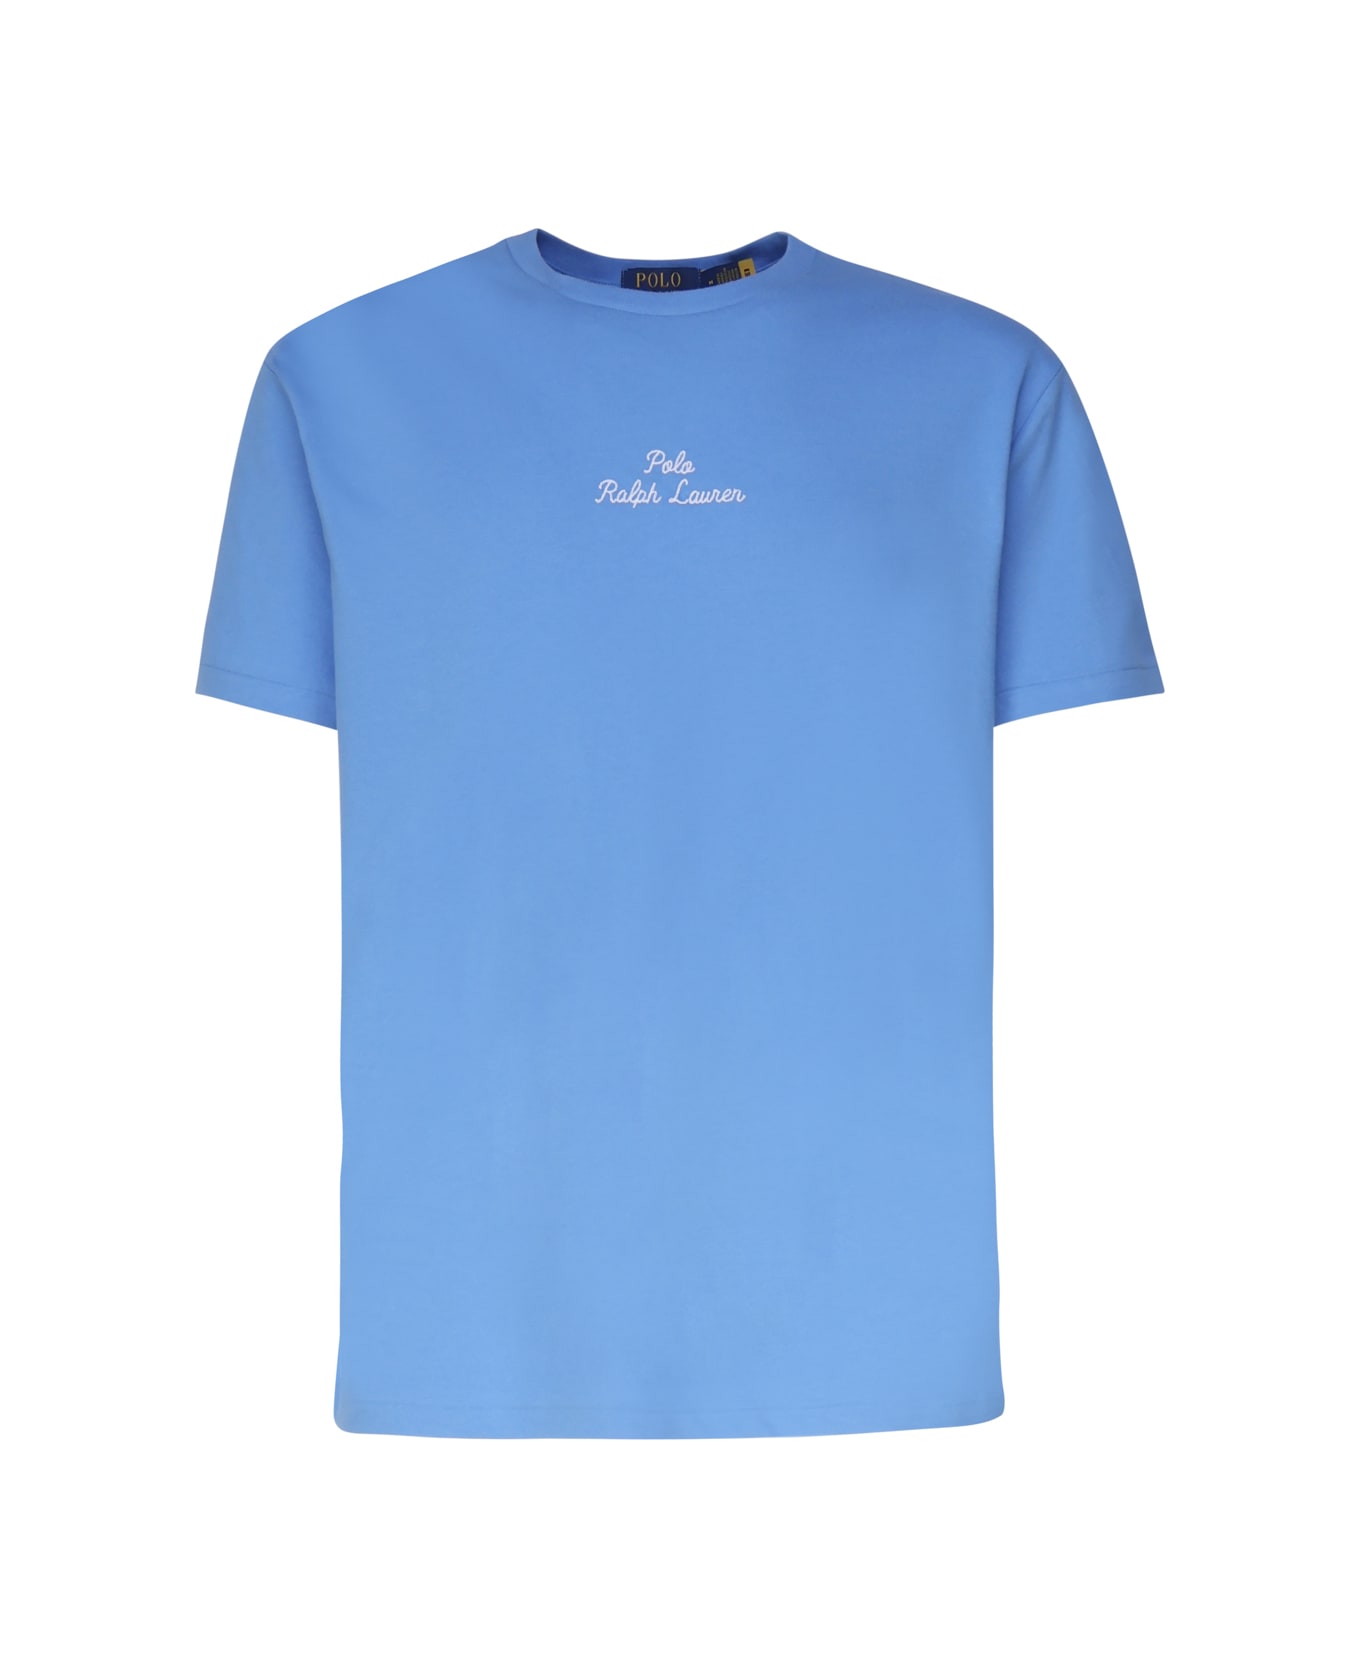 Polo Ralph Lauren T-shirt With Embroidery - Light blue シャツ